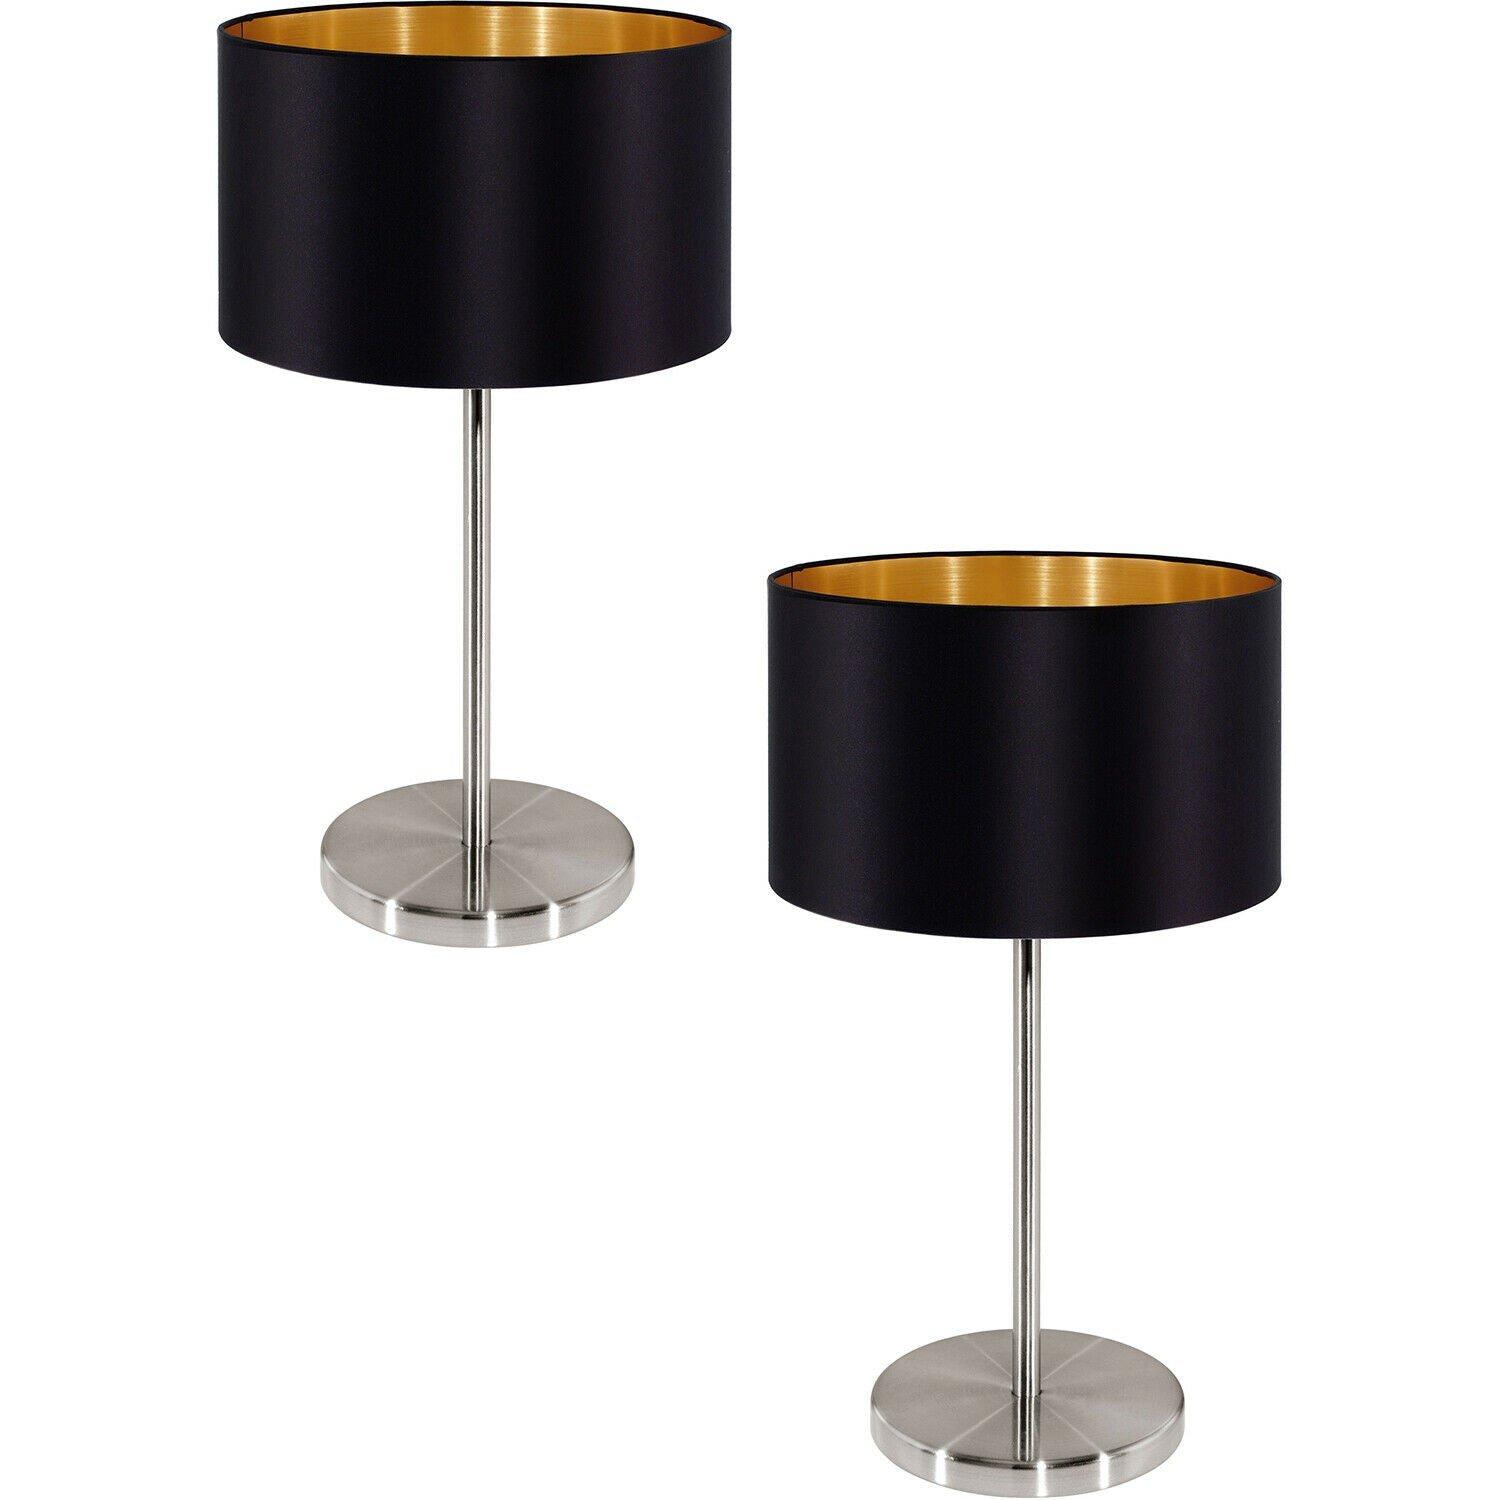 2 PACK Table Lamp Colour Satin Nickel Steel Shade Black Gold Fabric E27 1x60W